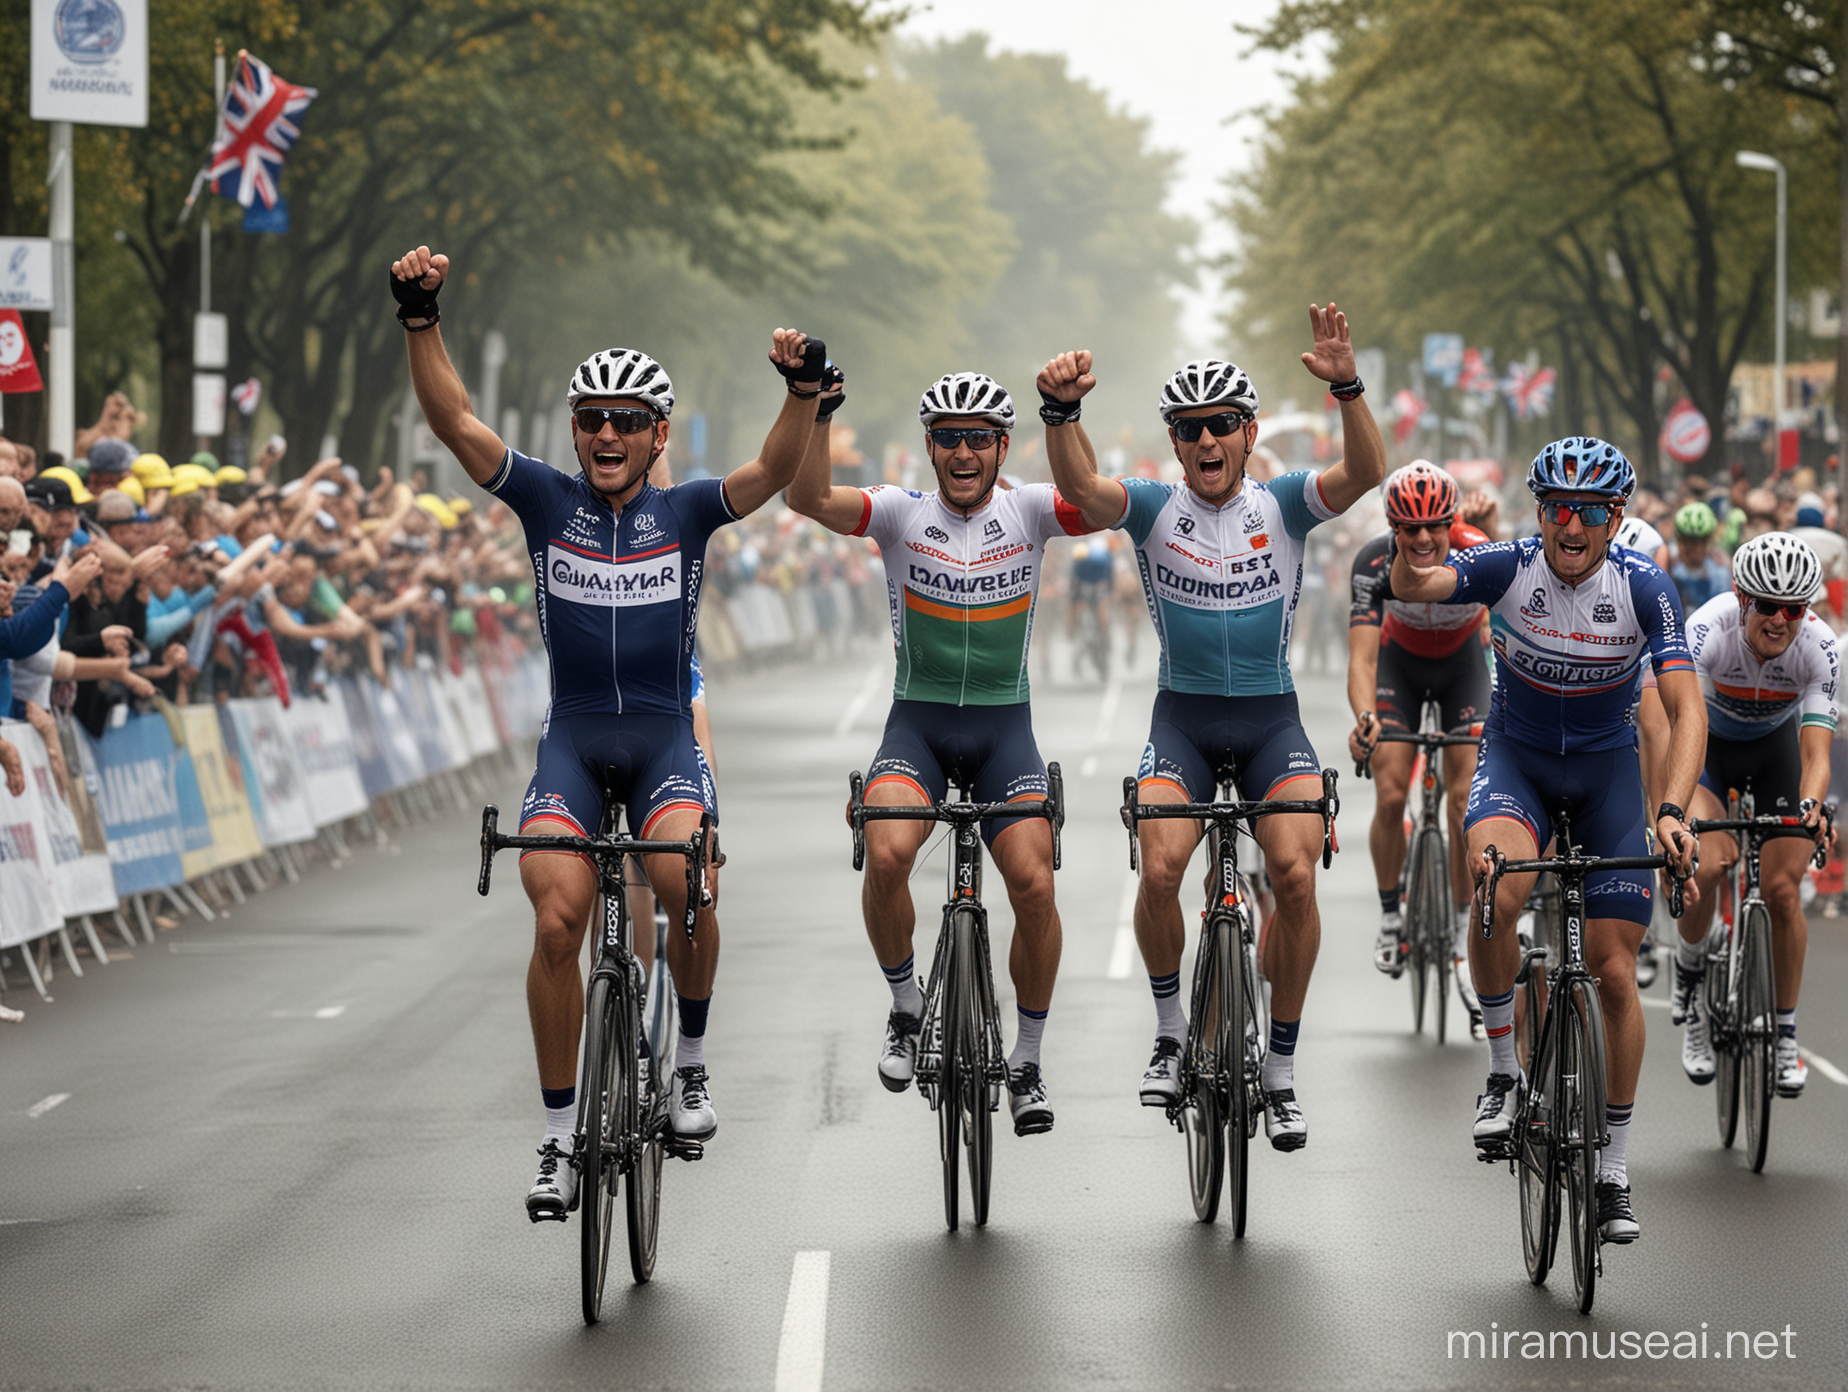 A world-class cycle road race. The team won the championship. All the riders are high-fiving.